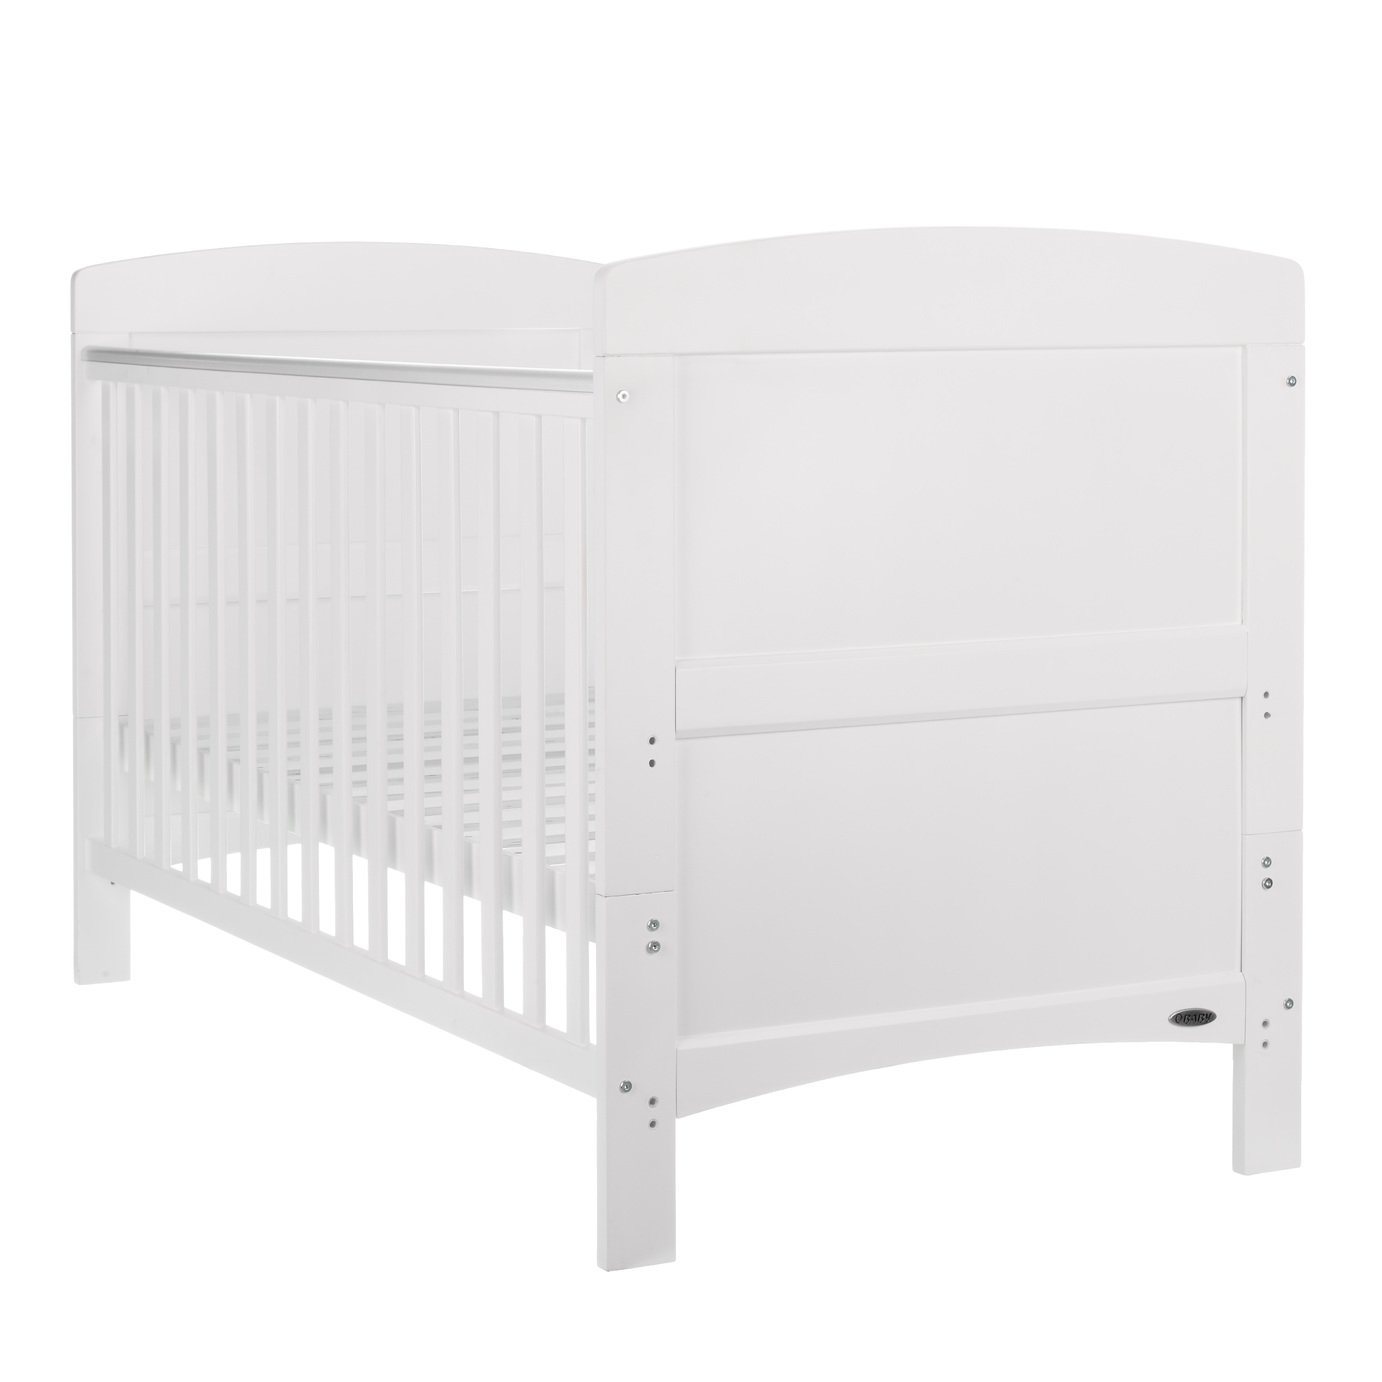 Obaby Grace Cot Bed with Mattress - White